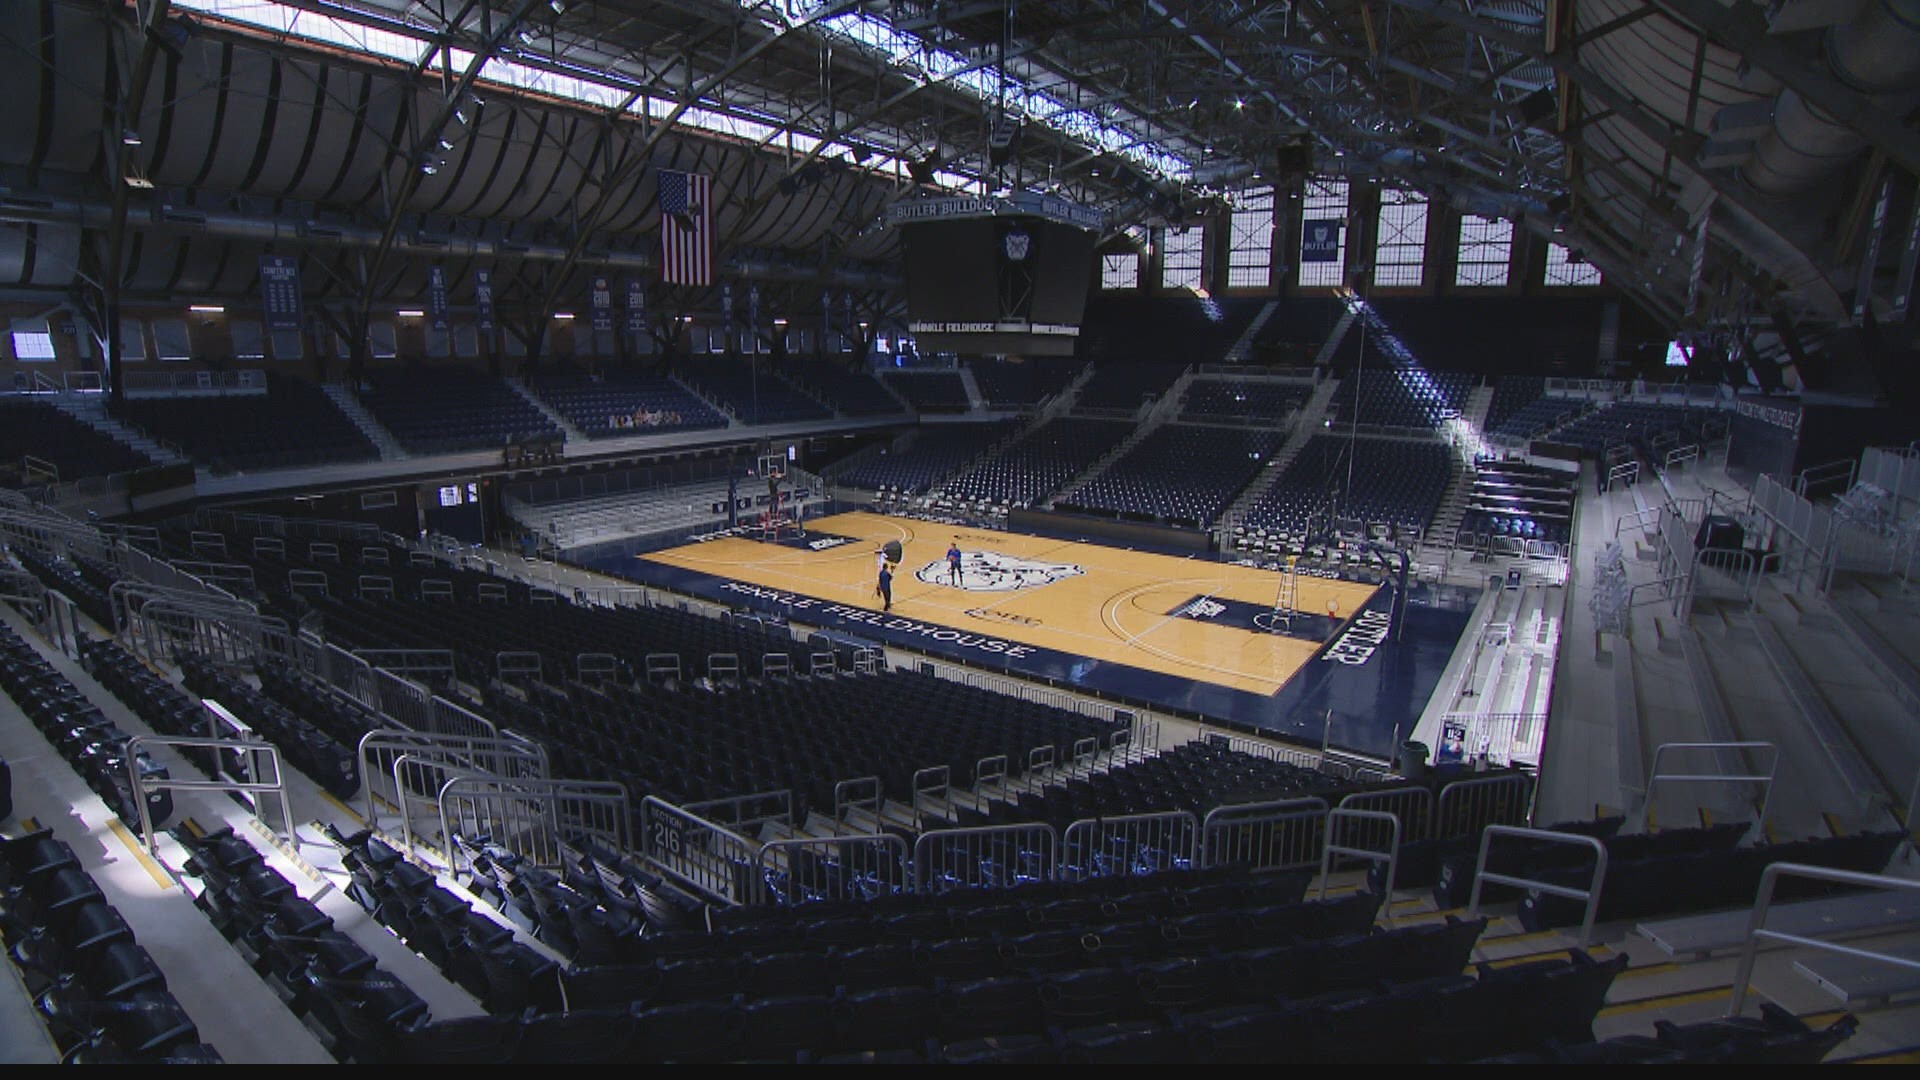 NCAA tournament games will be played at Hinkle Fieldhouse for the first time since 1940.